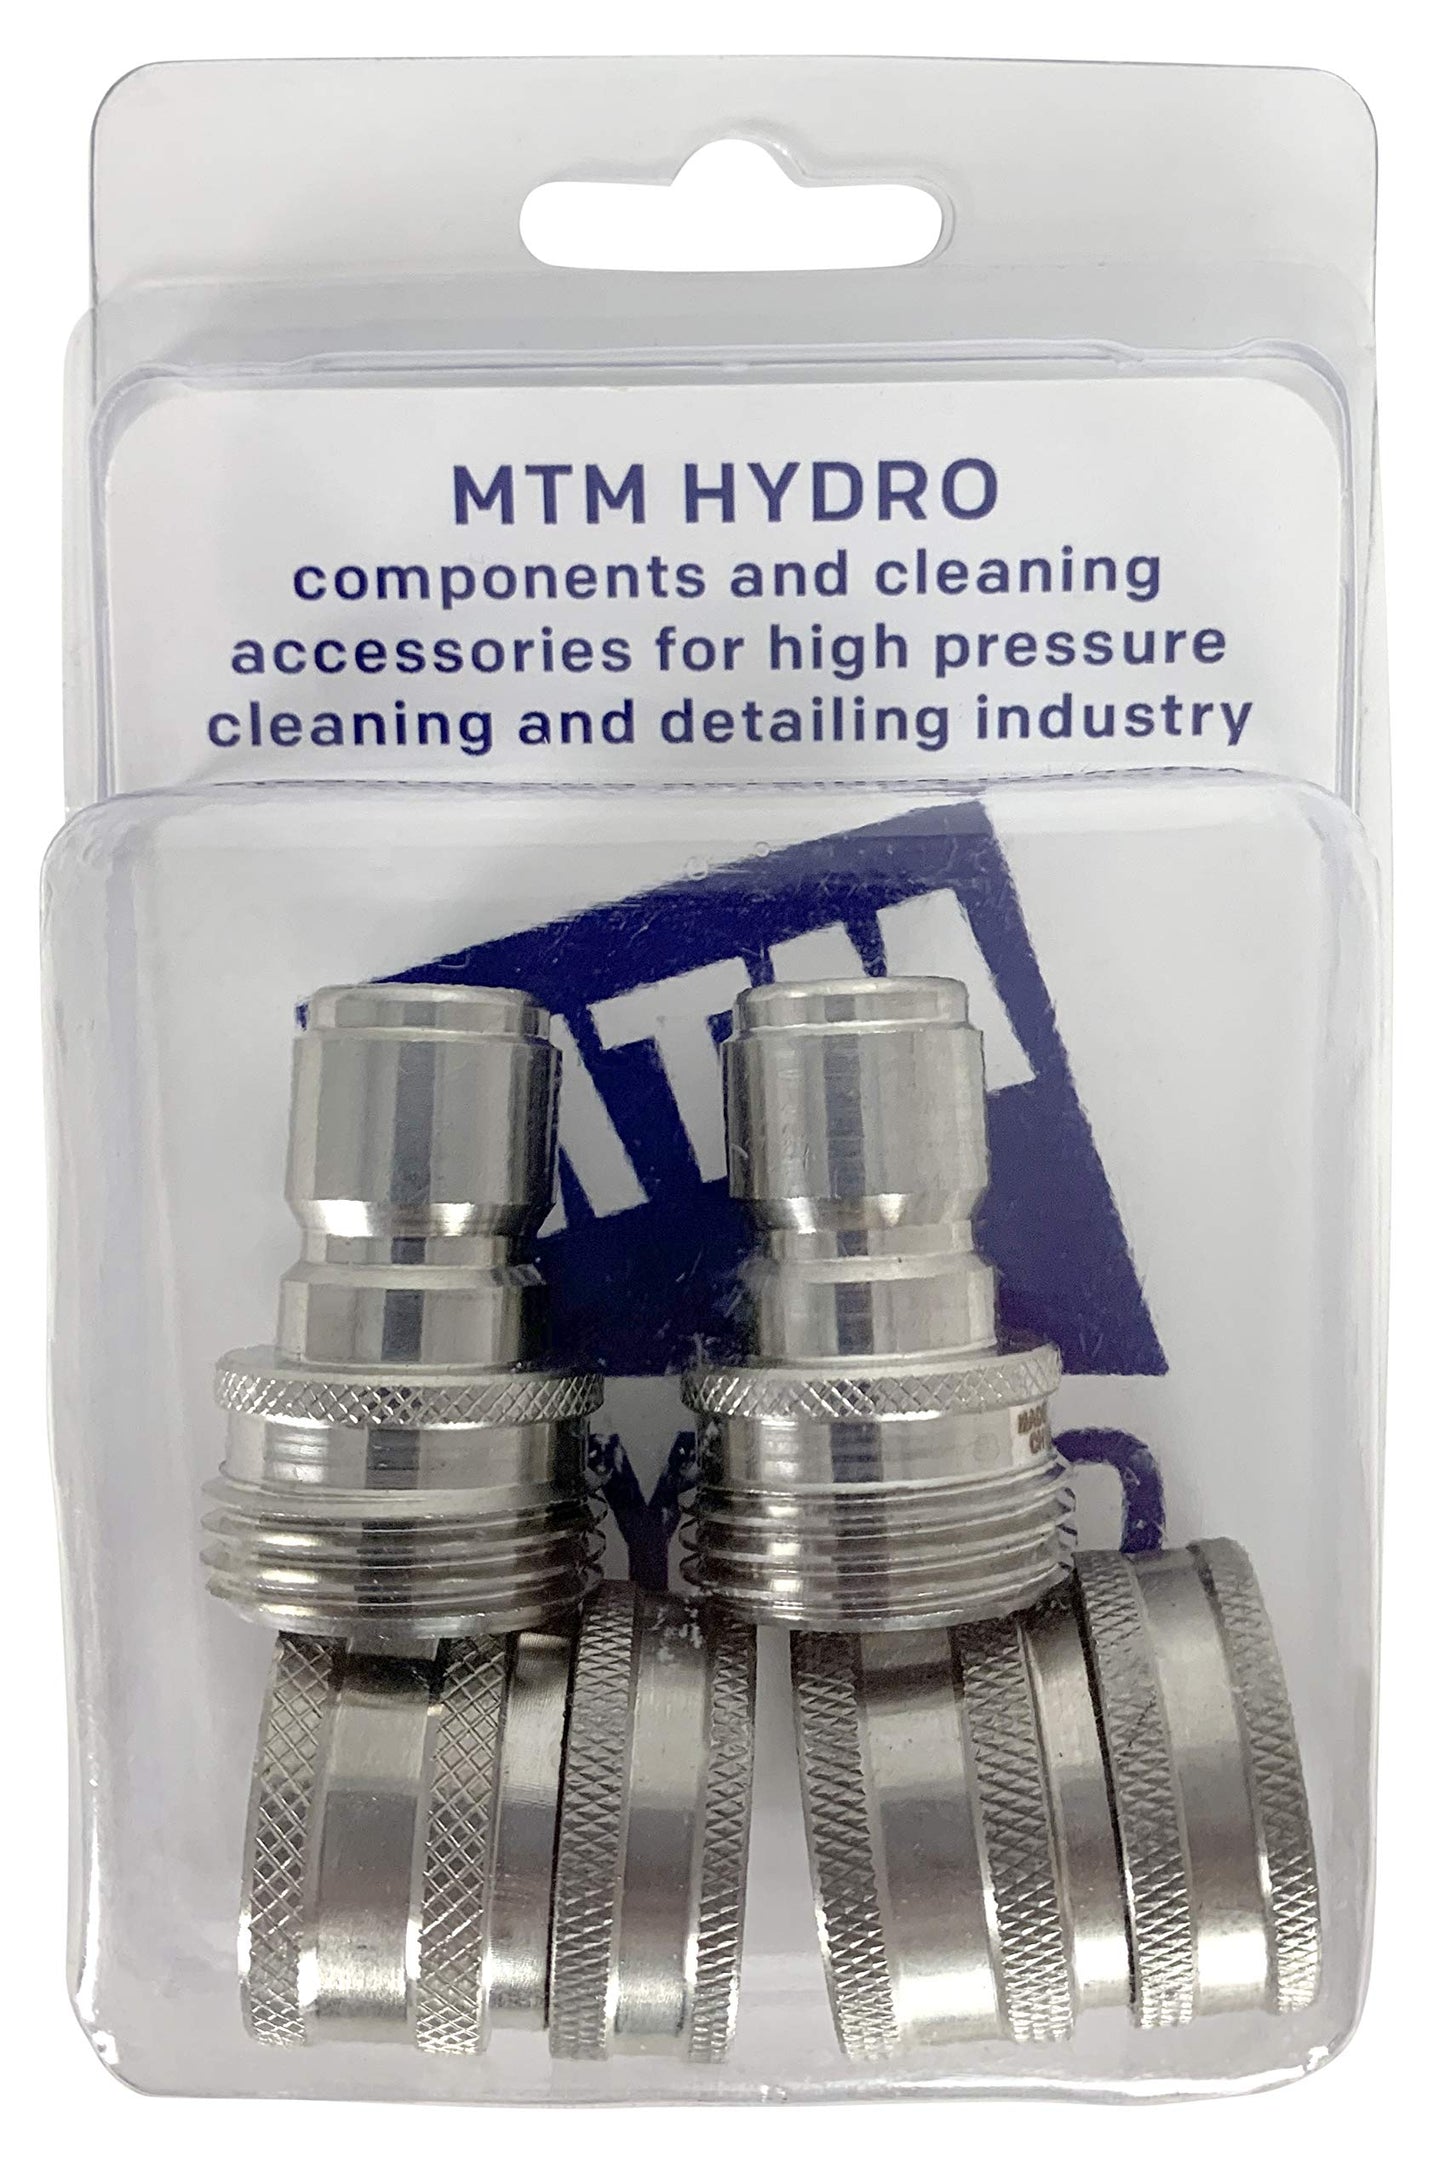 MTM Hydro Garden Hose Adapter 4 Piece 3/4? Quick Connect Fittings Kit, Stainless Steel High Pressure Couplings and Connectors for Pressure Washers and Car Detailing, 2x2